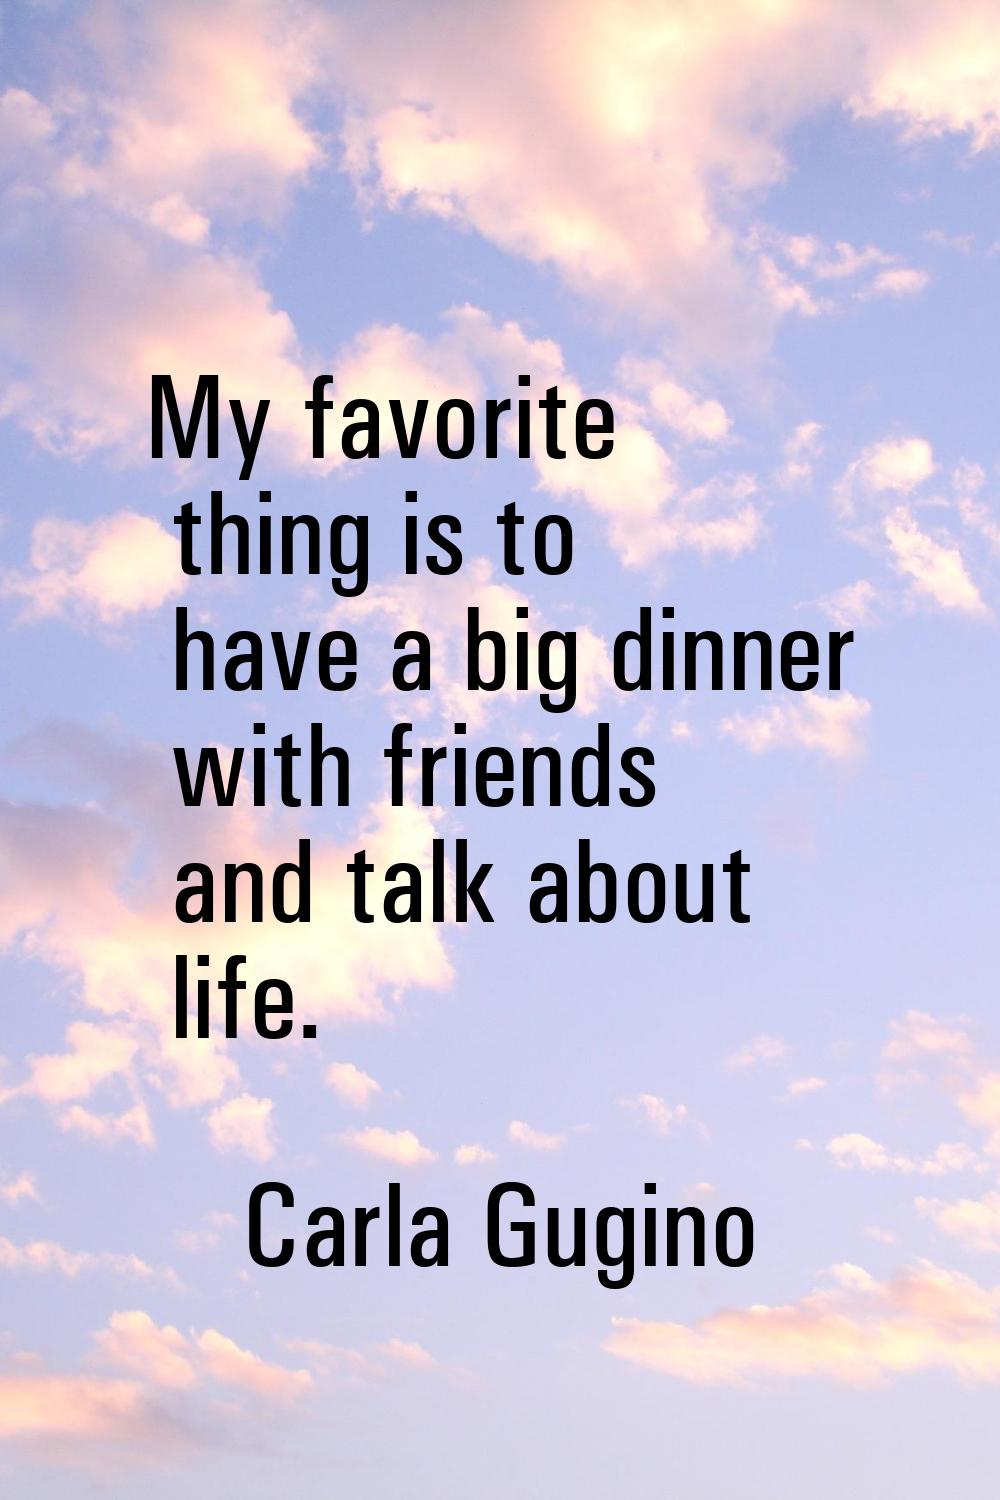 My favorite thing is to have a big dinner with friends and talk about life.